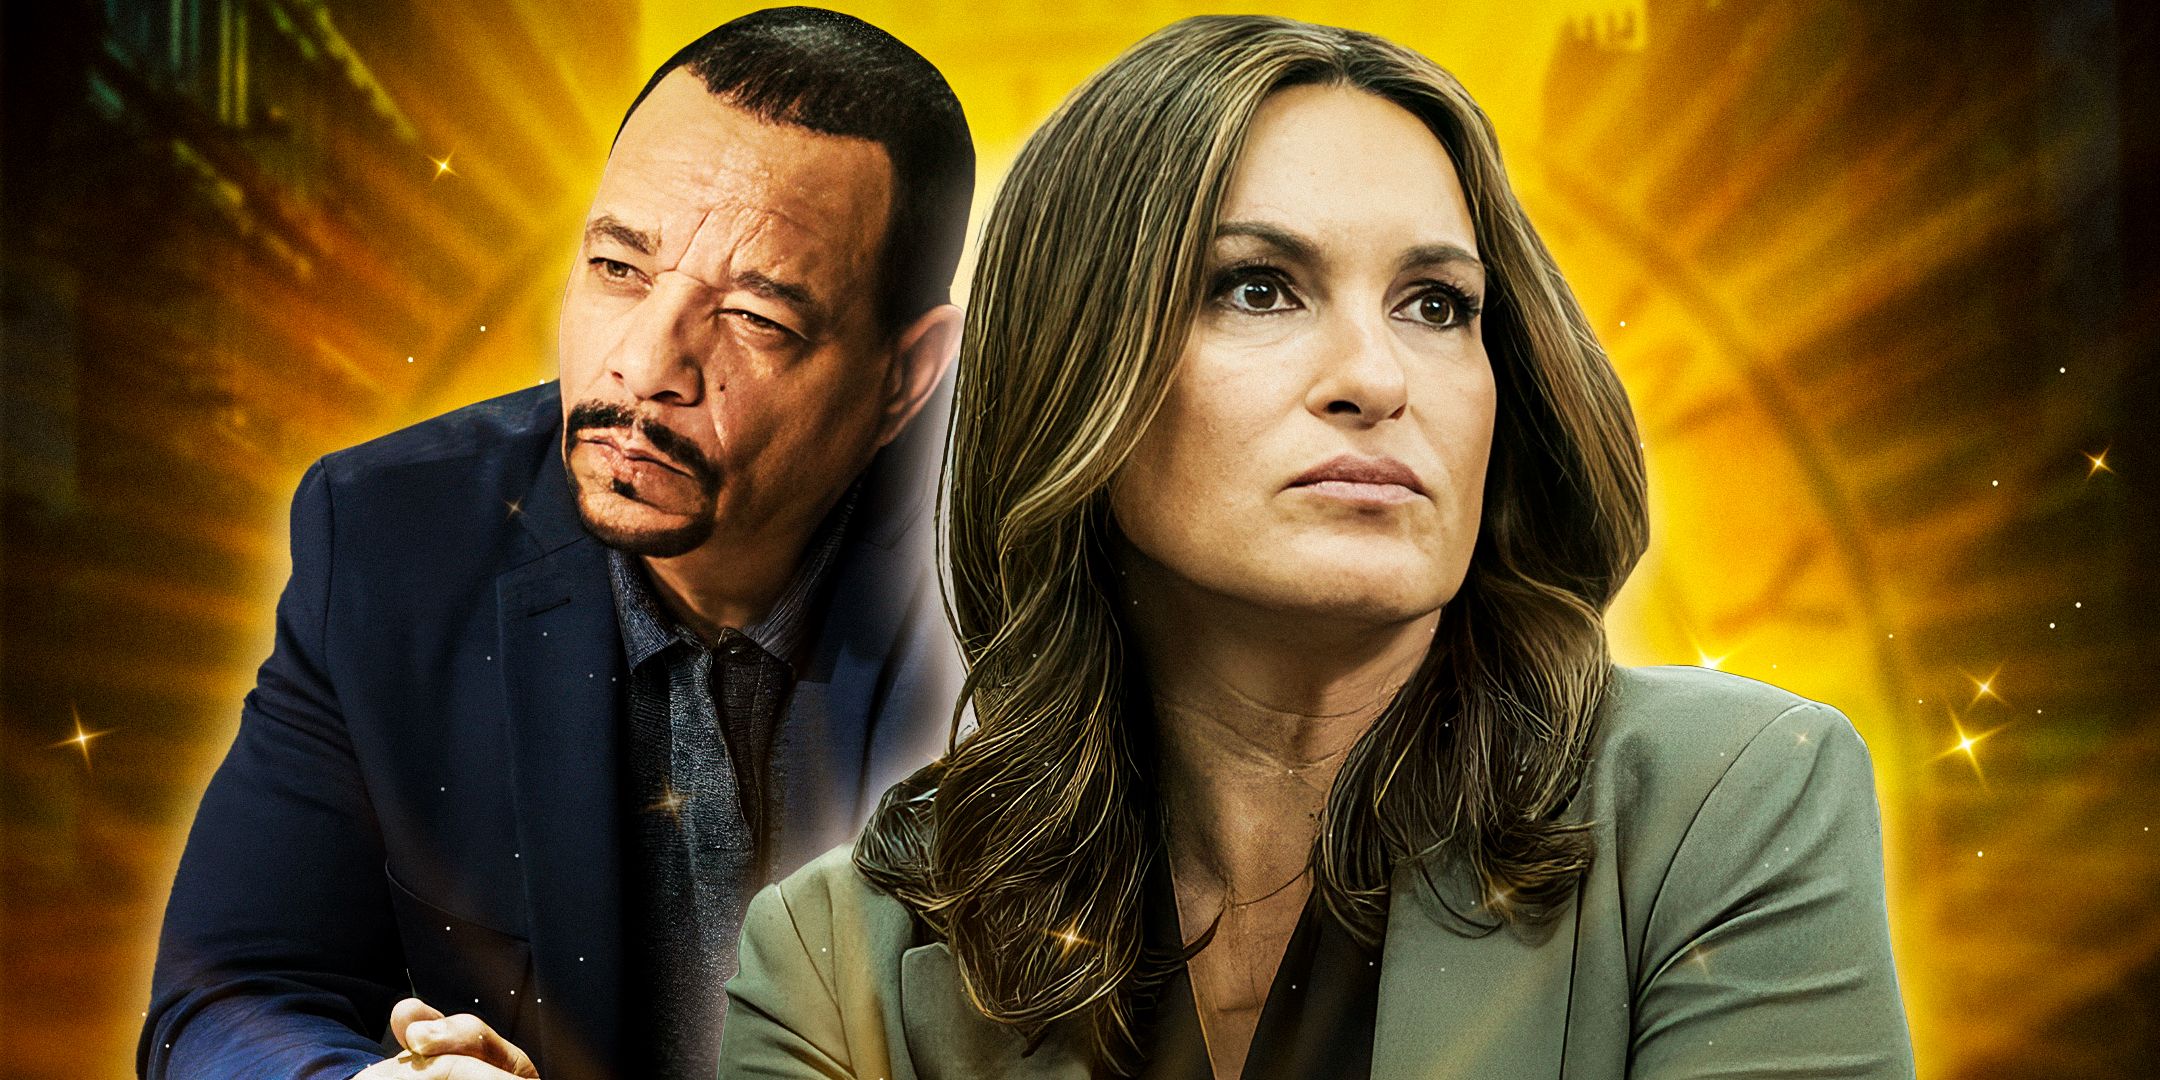 Law & Order: SVU's Olivia Benson and Odafin 